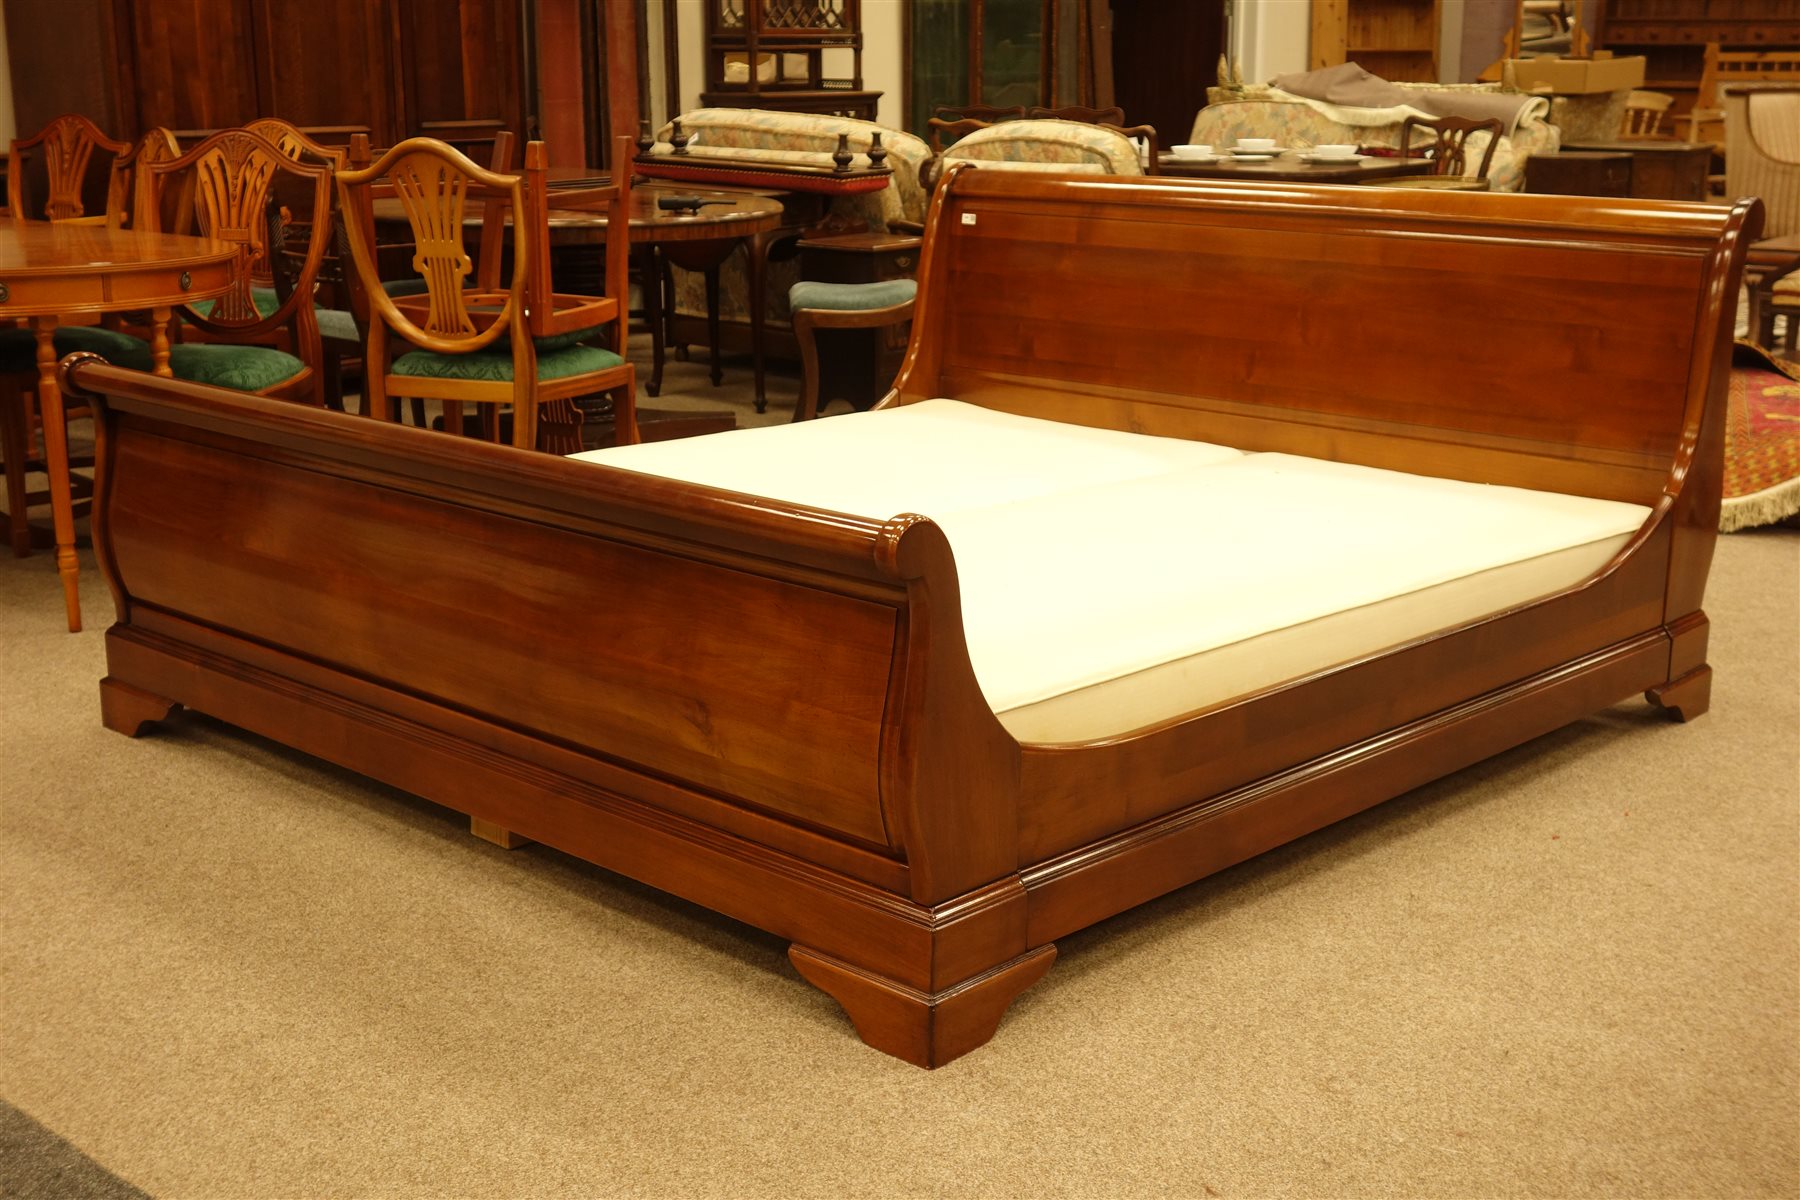 French Cherry Wood 6 Super King Size, King Size Wooden Sleigh Bed Frame